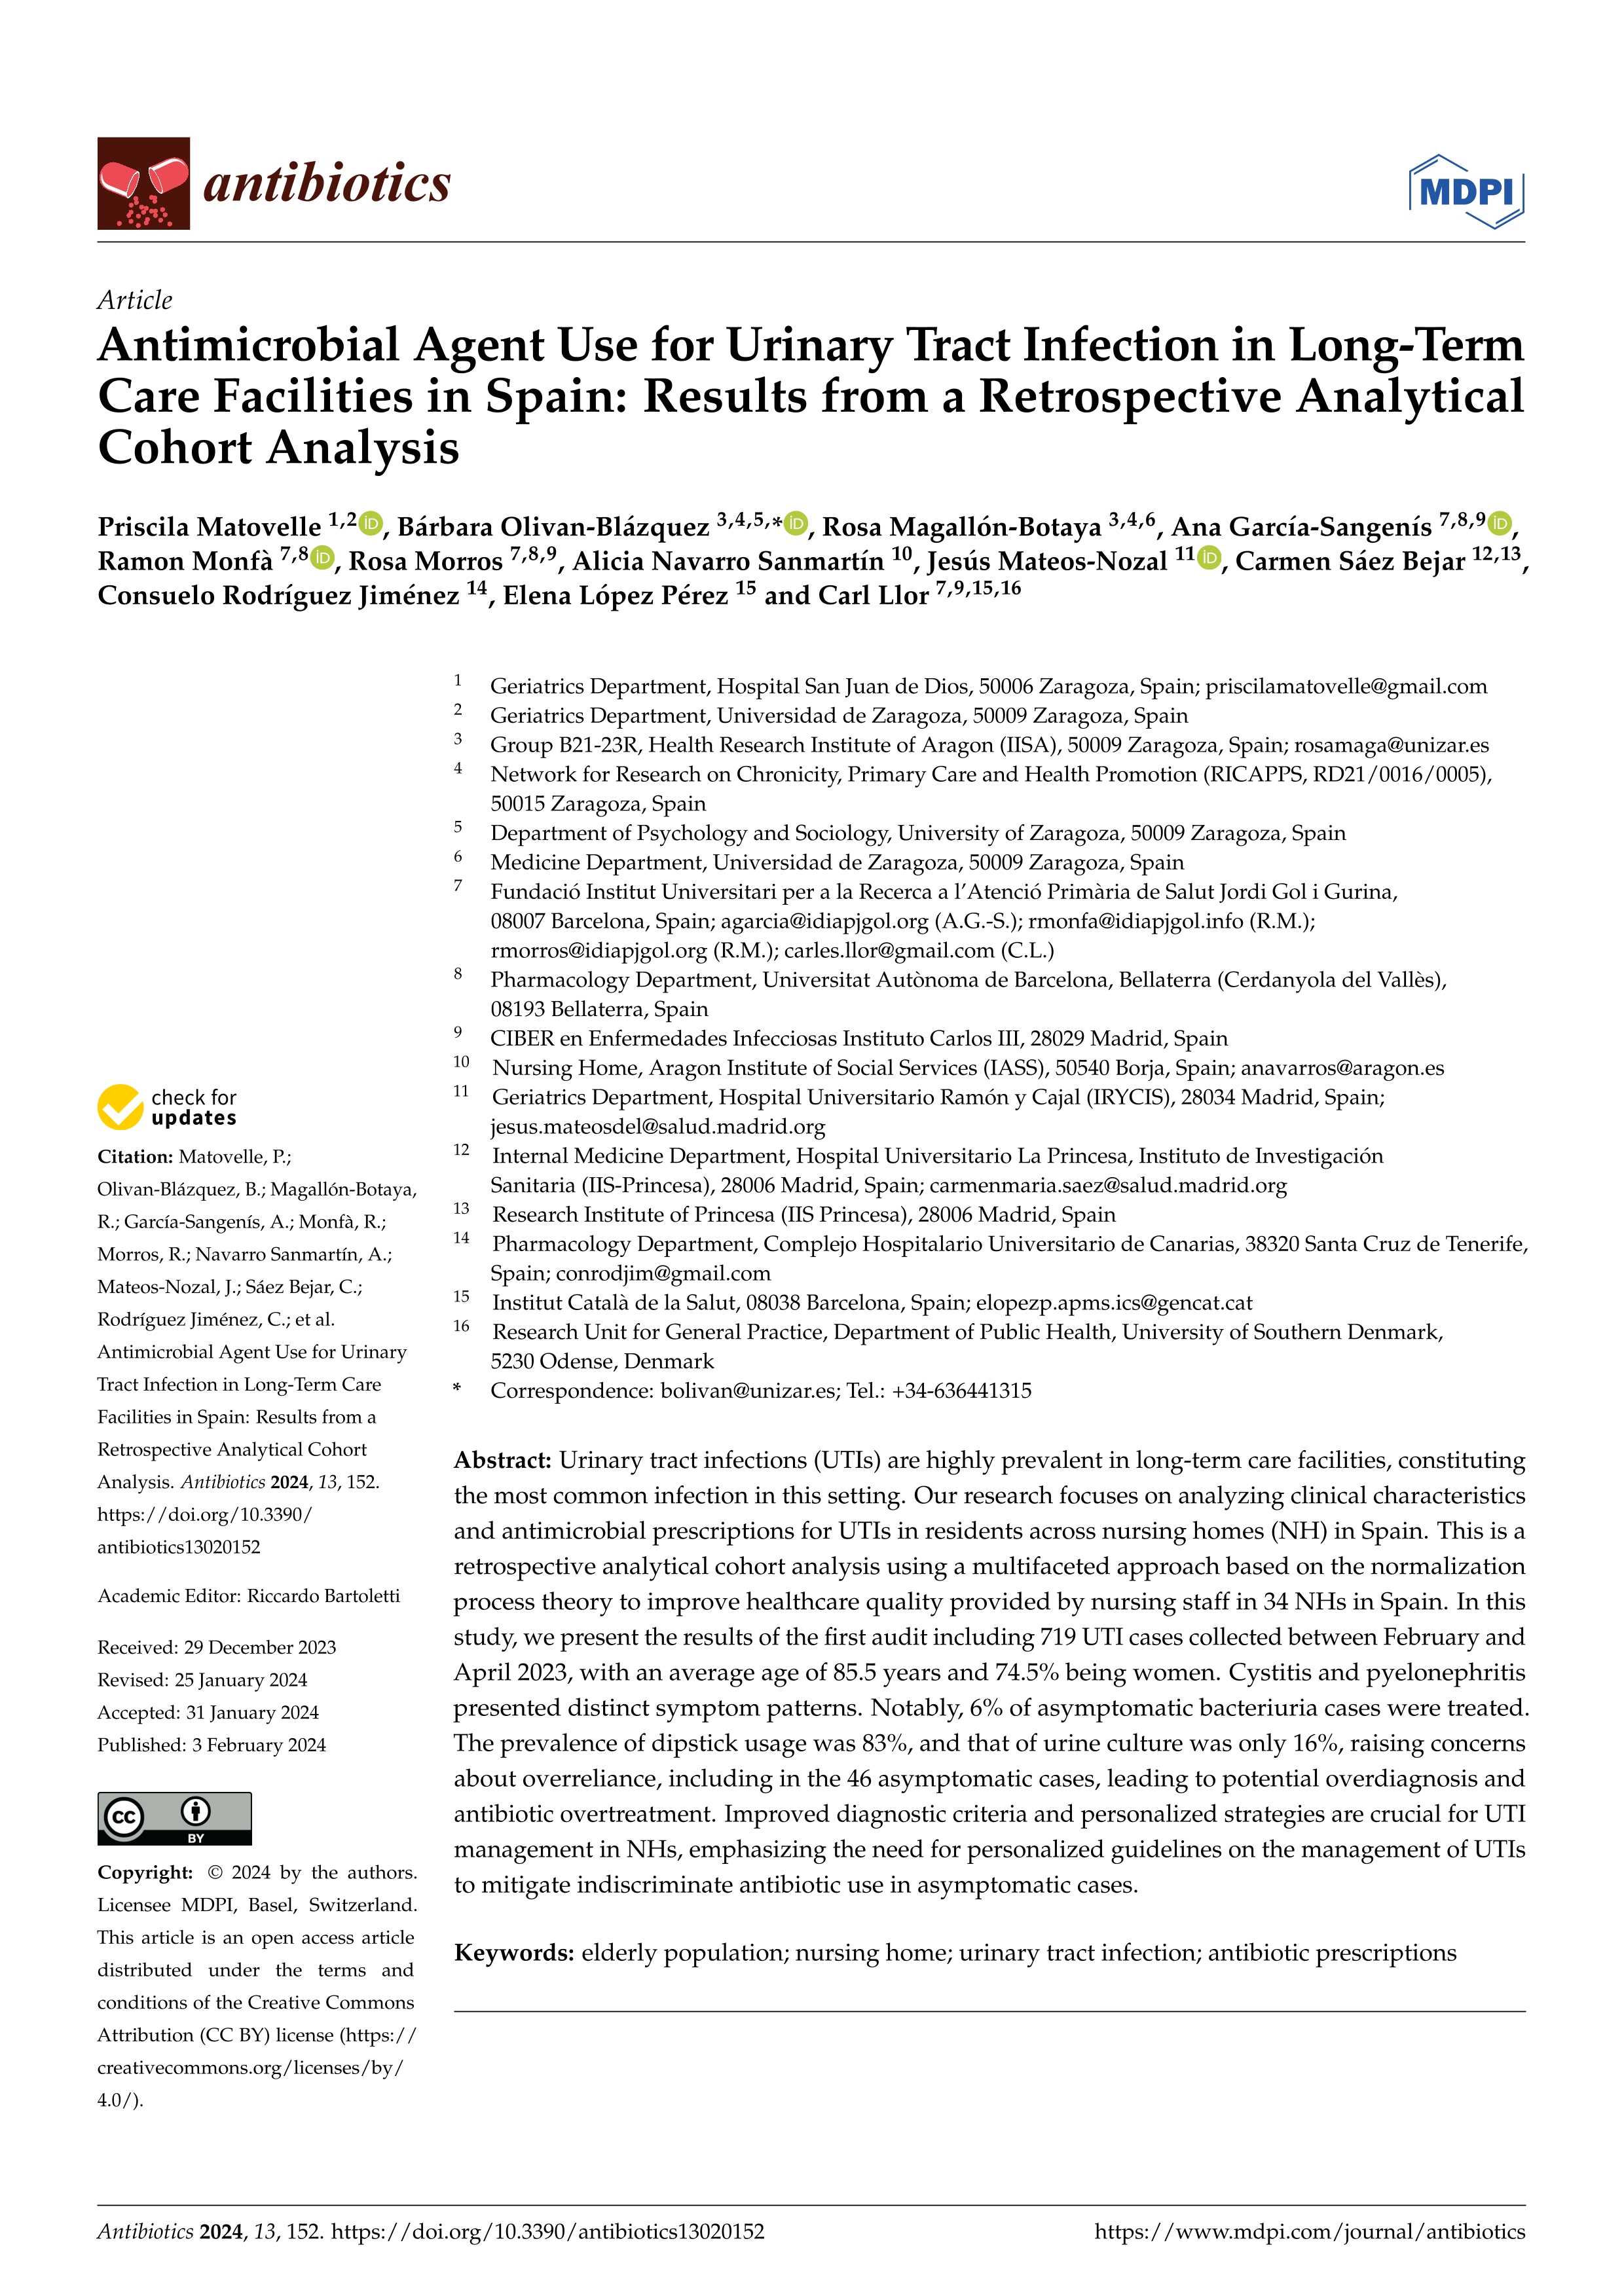 Antimicrobial Agent Use for Urinary Tract Infection in Long-Term Care Facilities in Spain: Results from a Retrospective Analytical Cohort Analysis